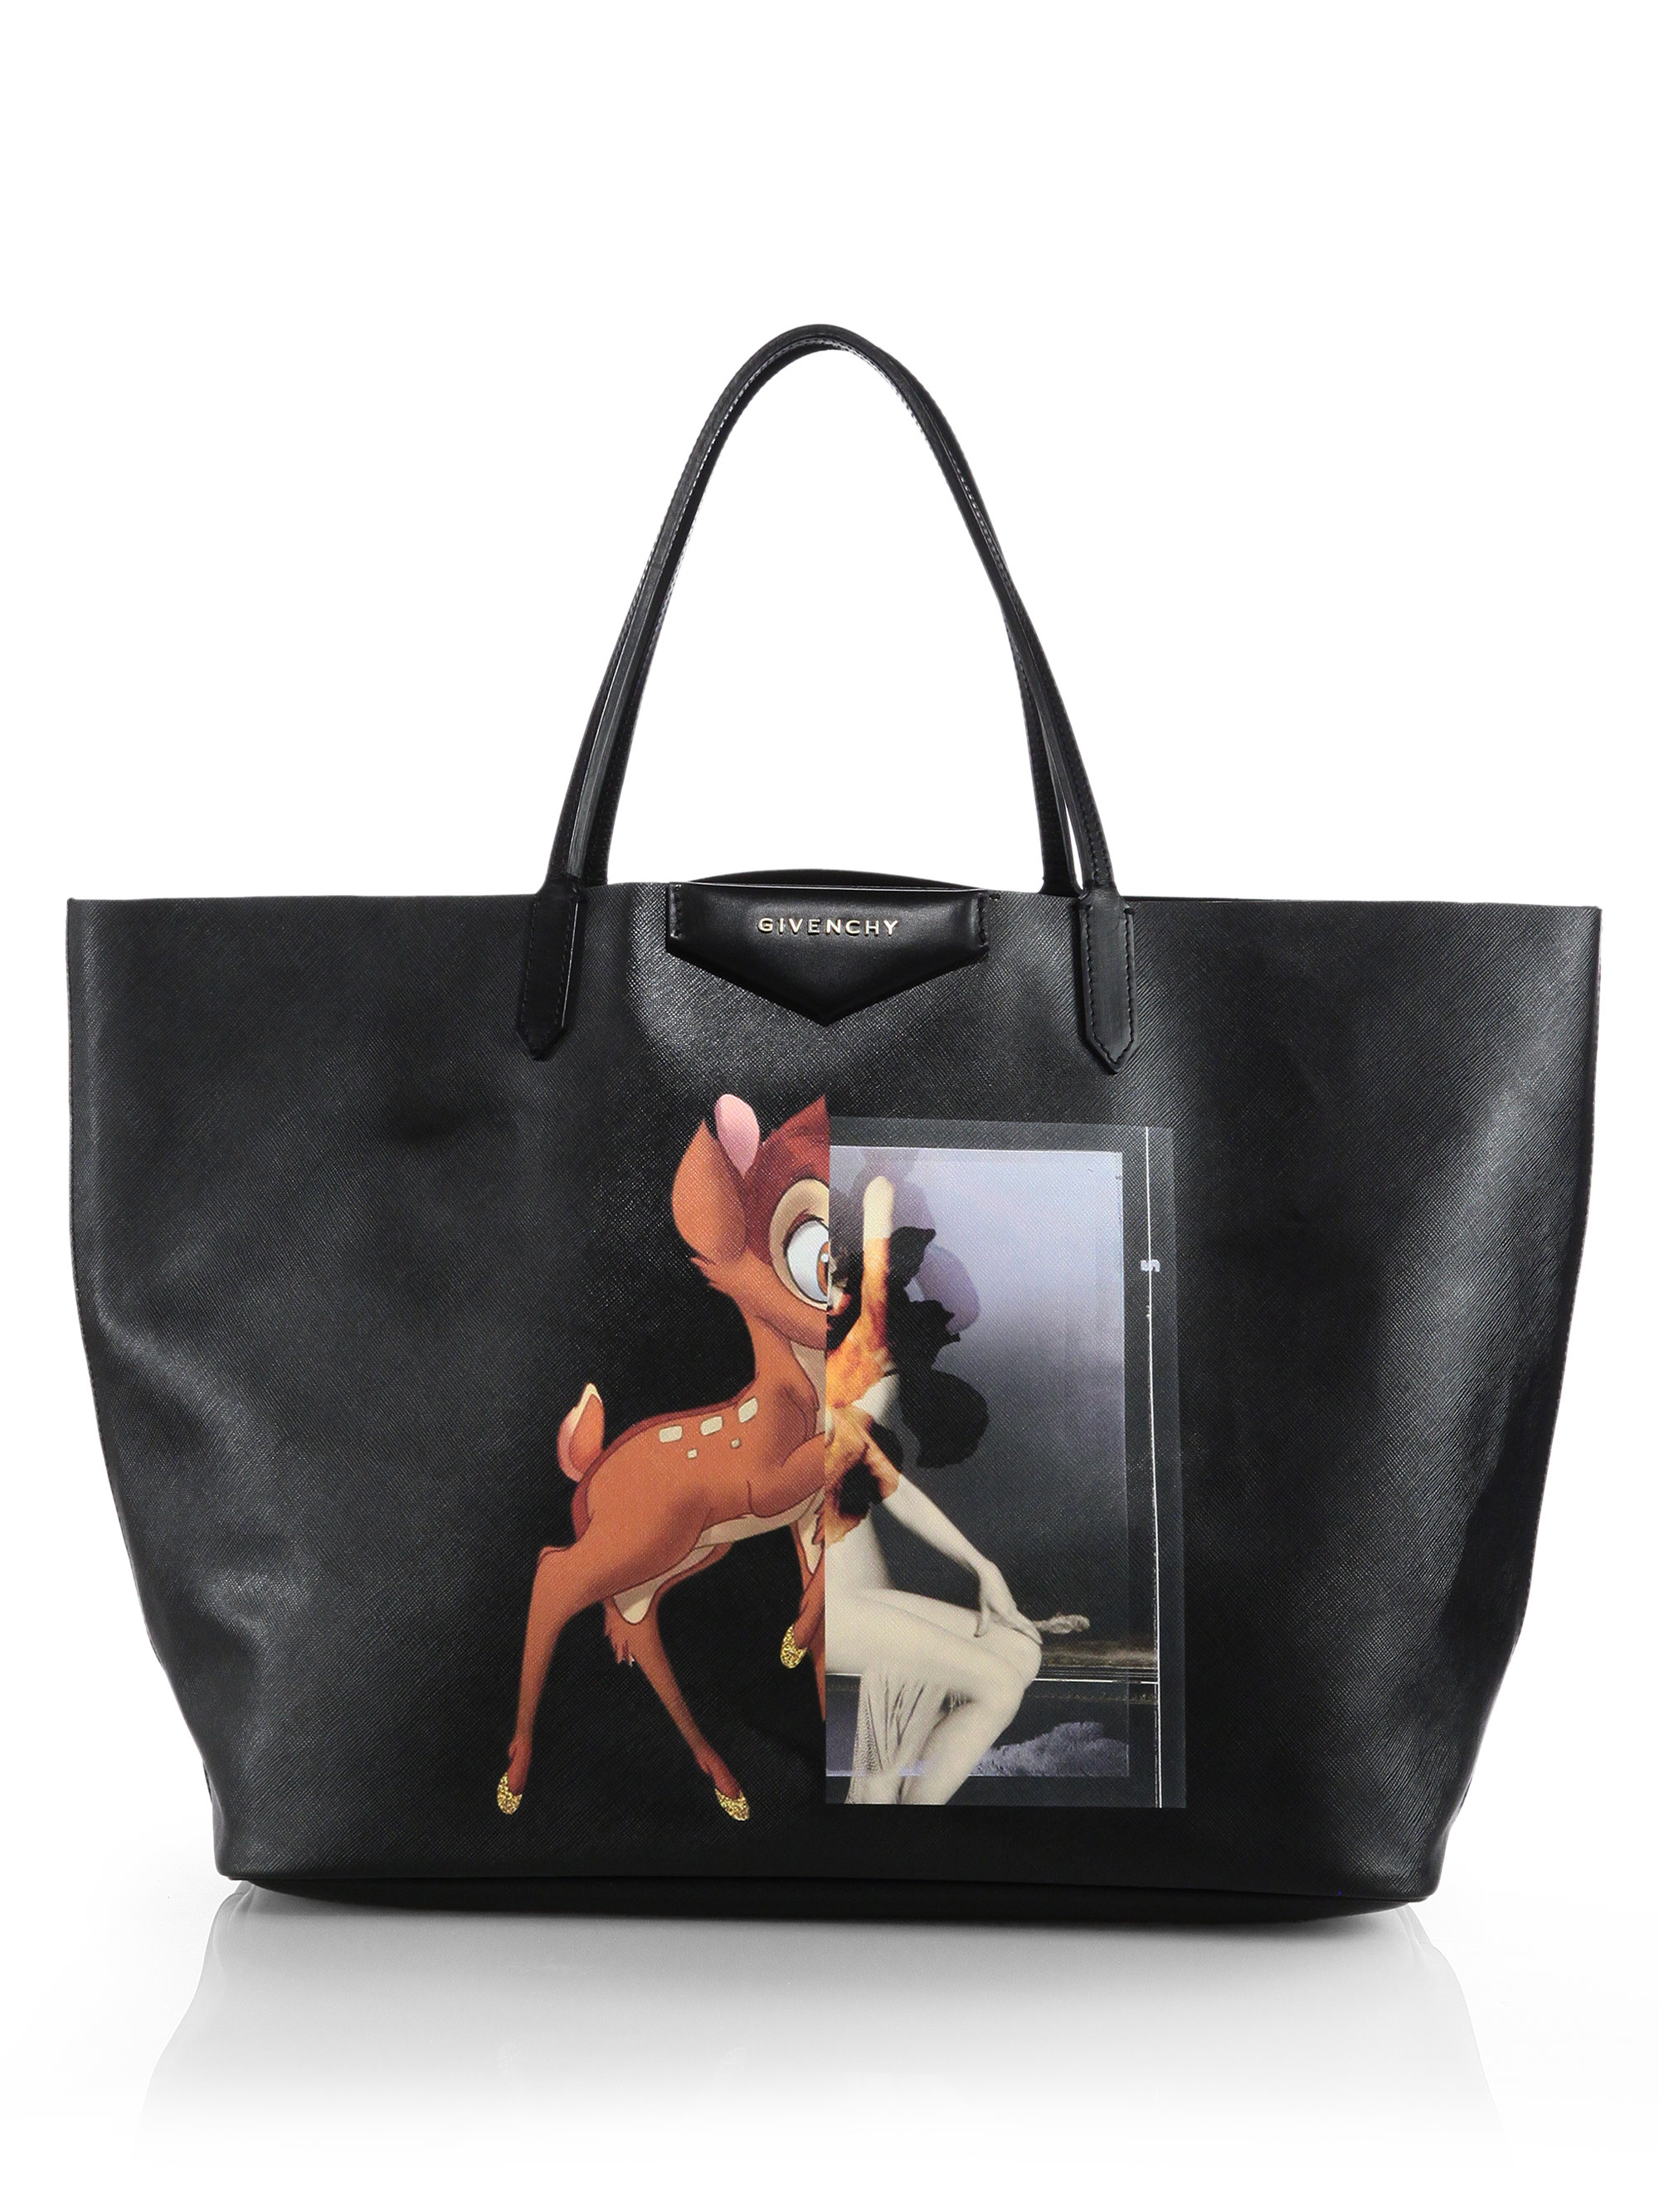 Lyst - Givenchy Bambi Medium Leather Shopper Tote in Black